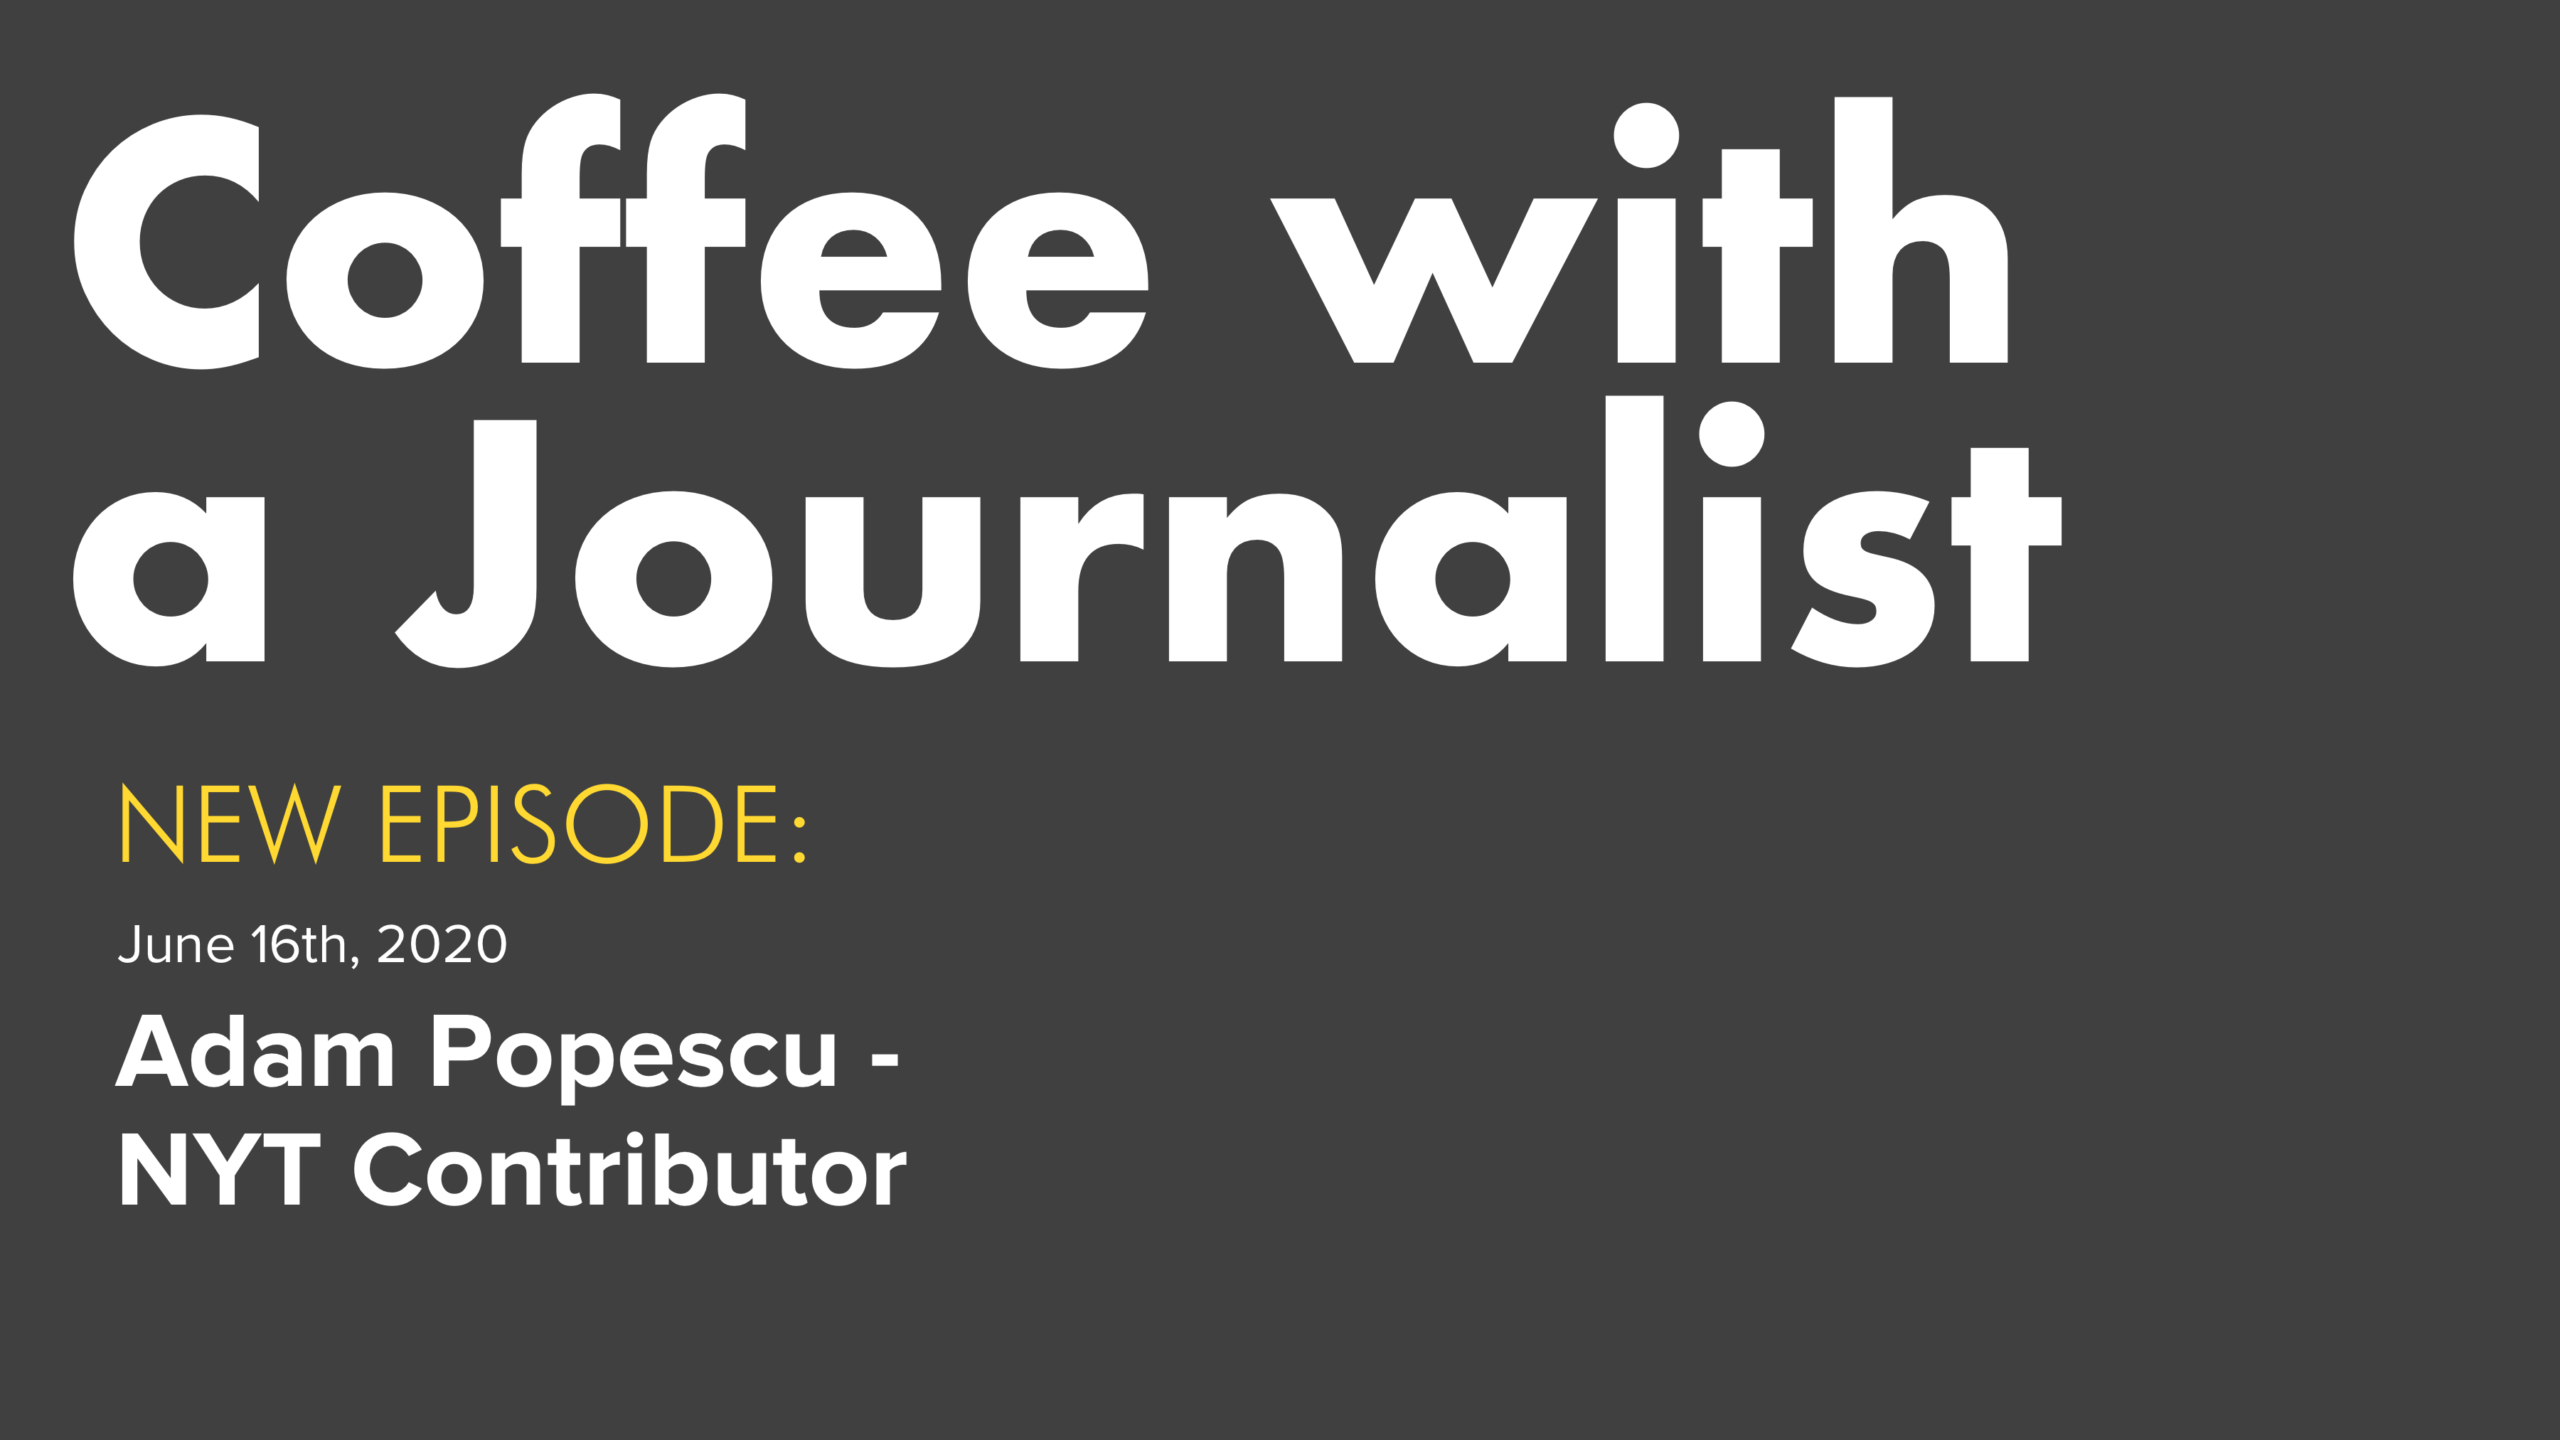 Coffee with a Journalist: Adam Popescu, NYT Contributor